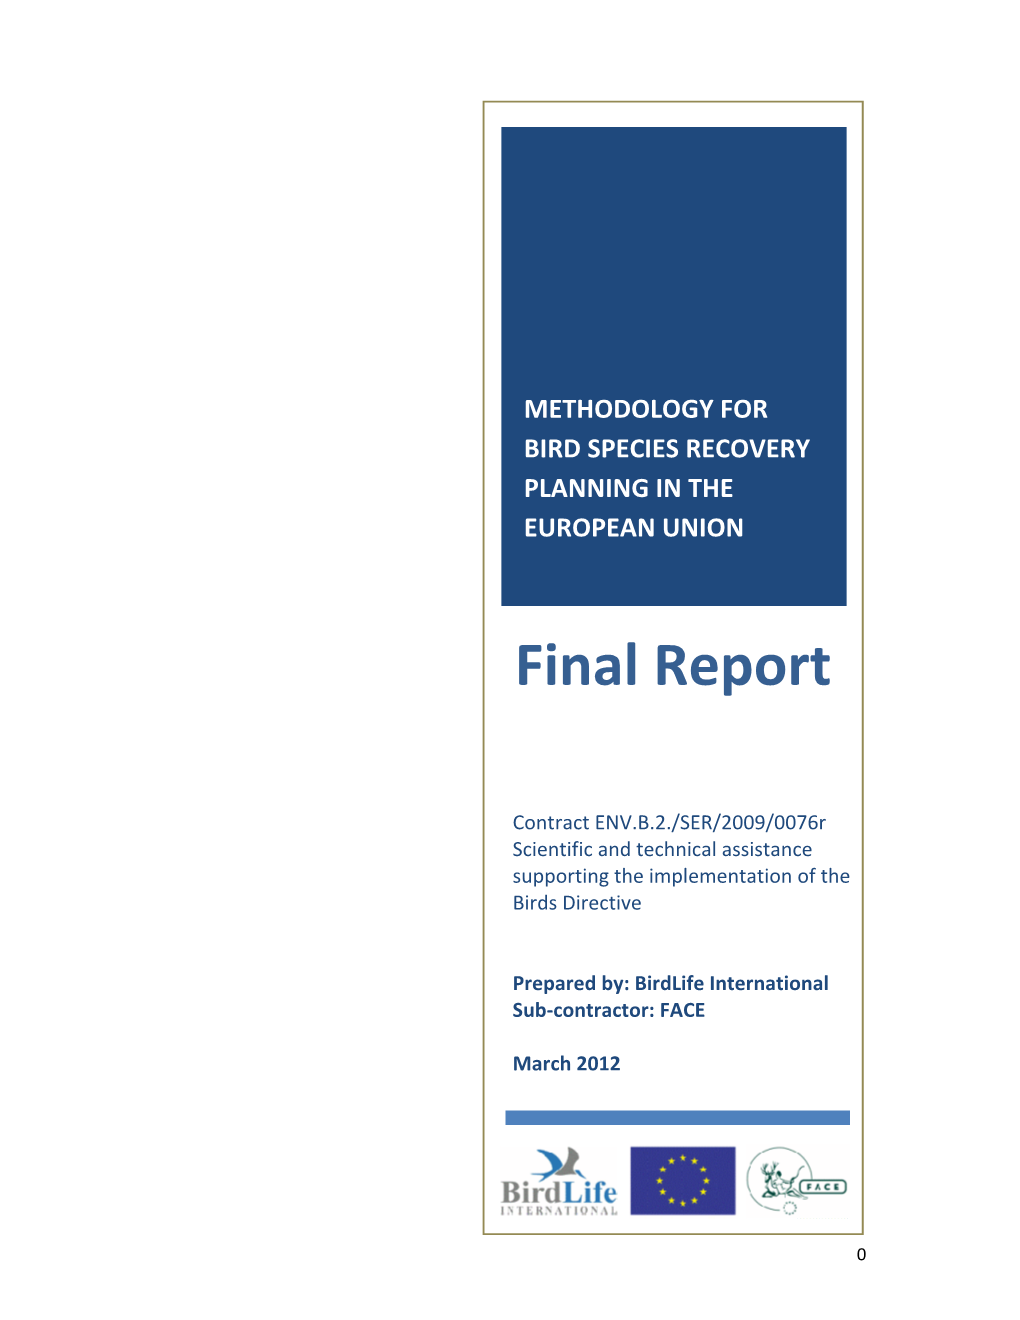 Final Report, Methodology for Bird Species Recovery Planning